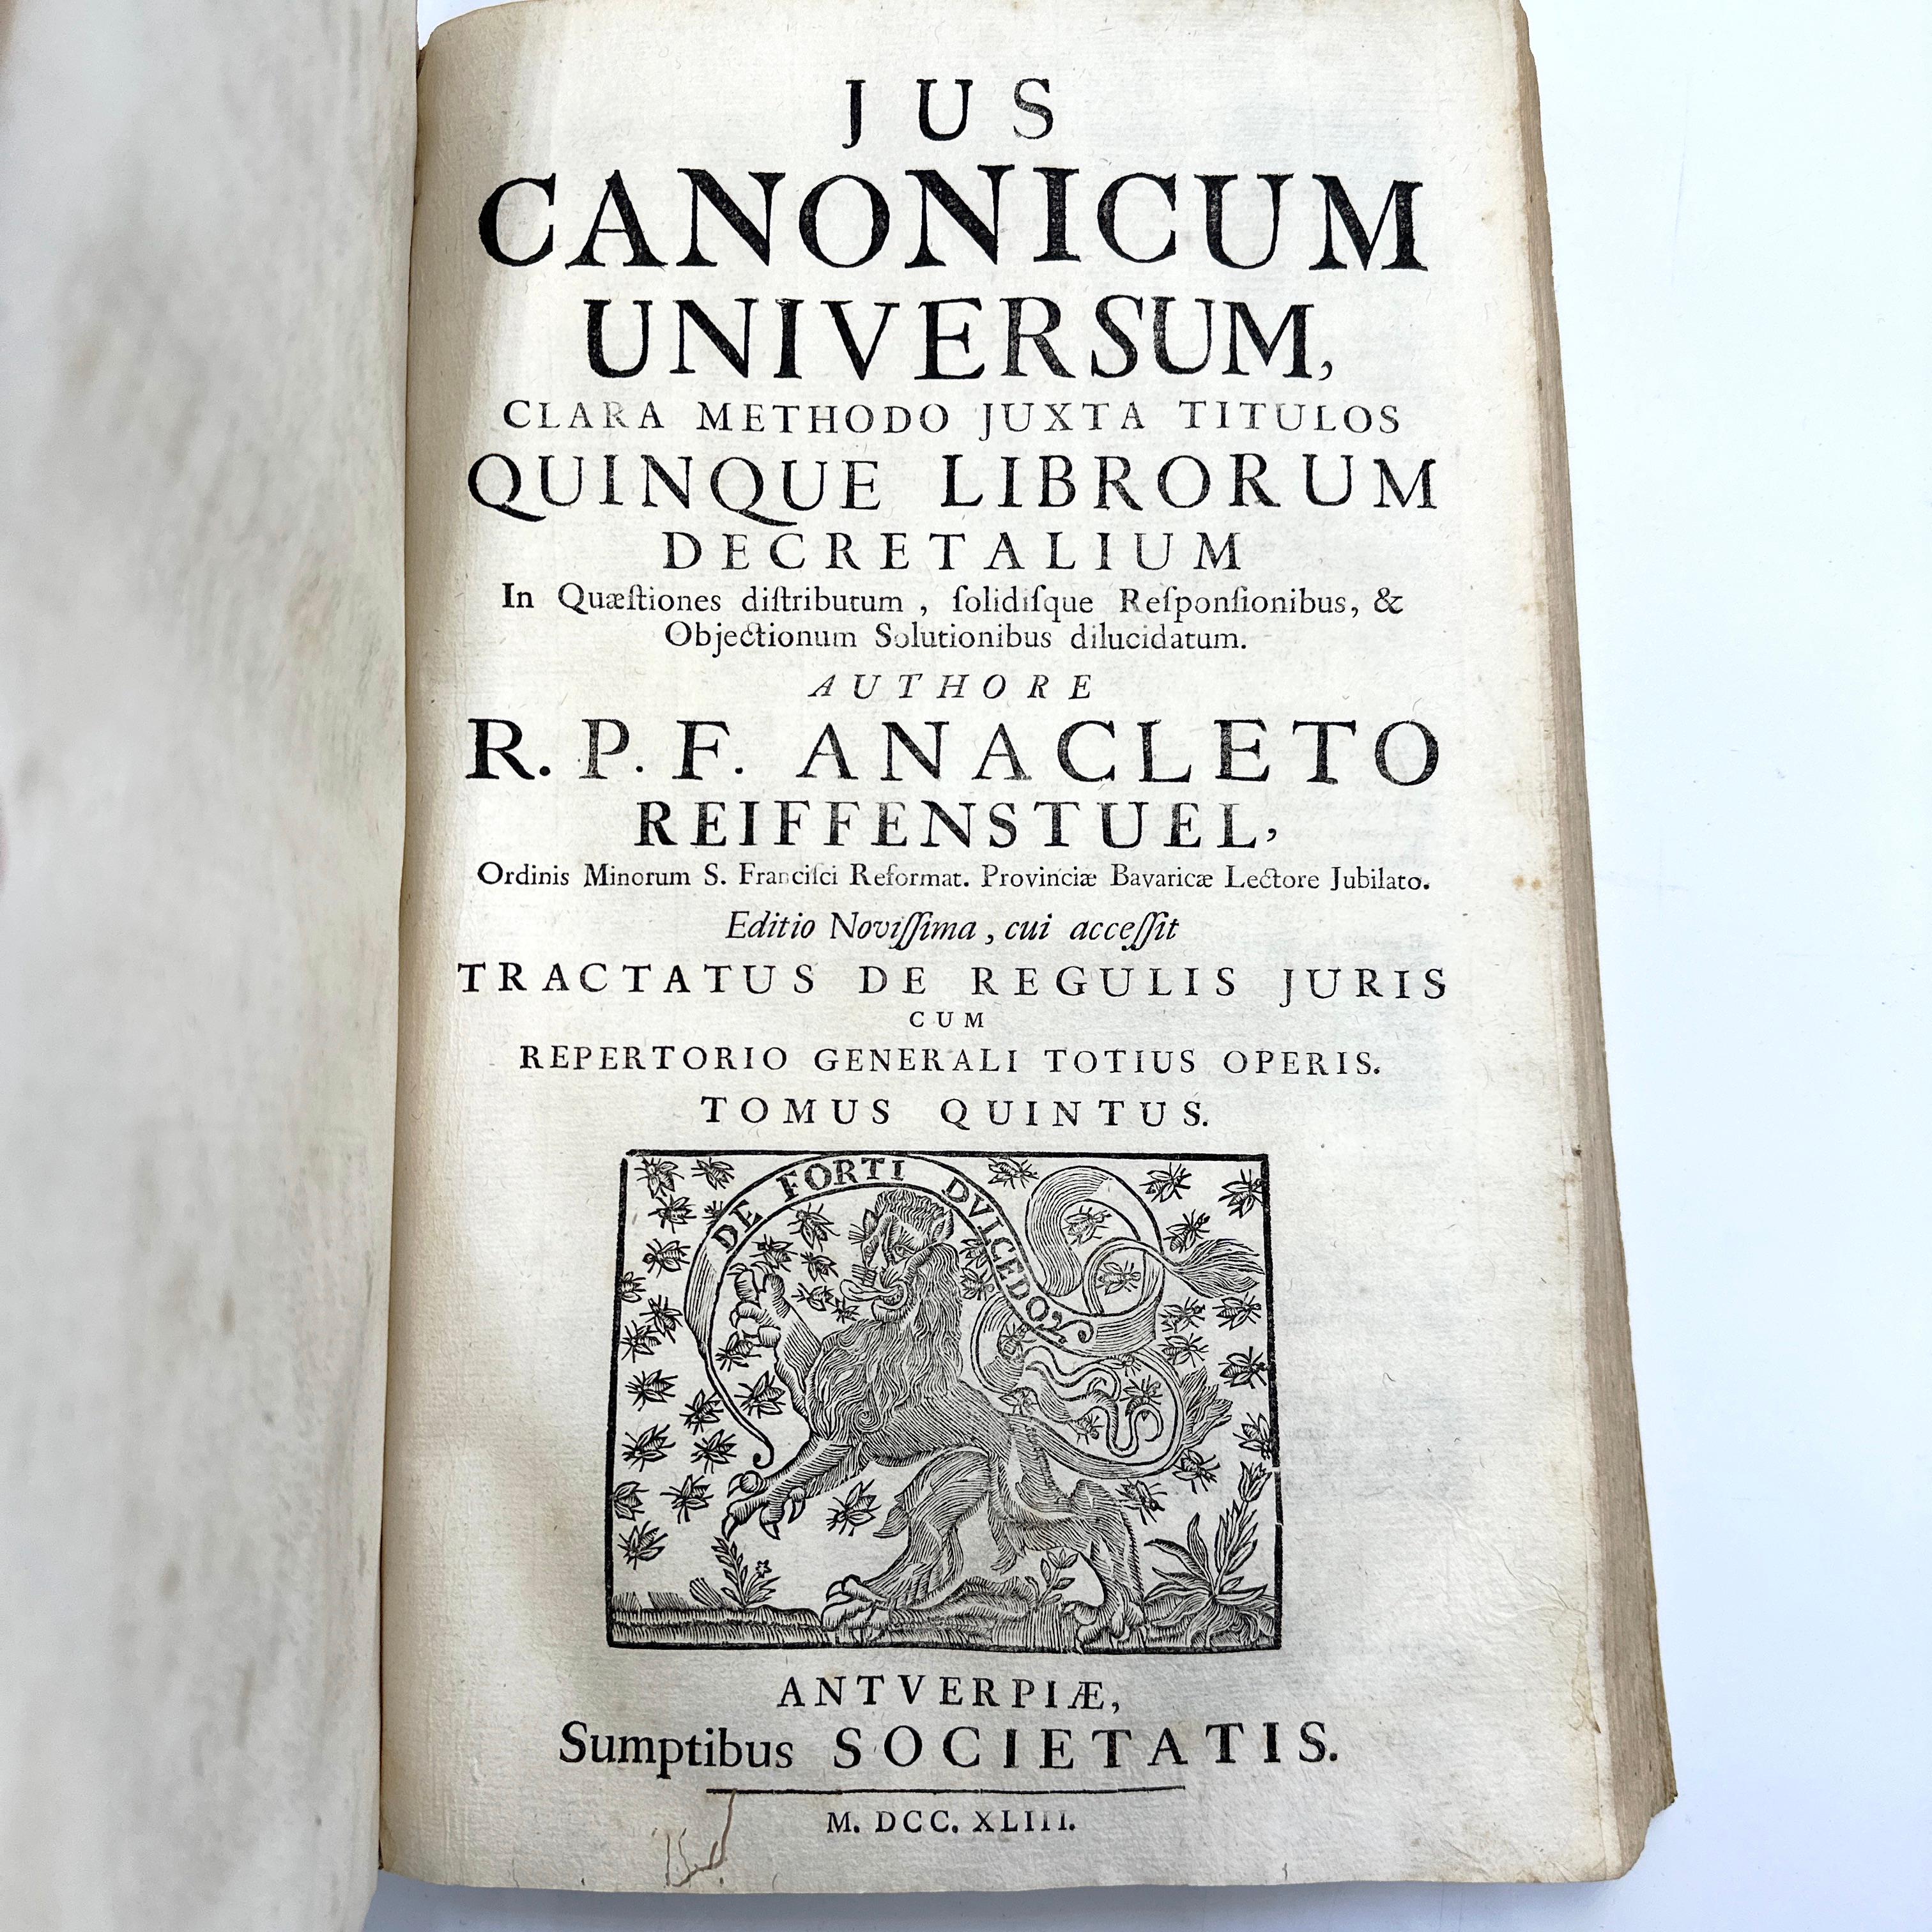 Leather 1743 Jus Canonicum Universum (Universal Canon Law) (2 volumes bound as 1). Bound For Sale